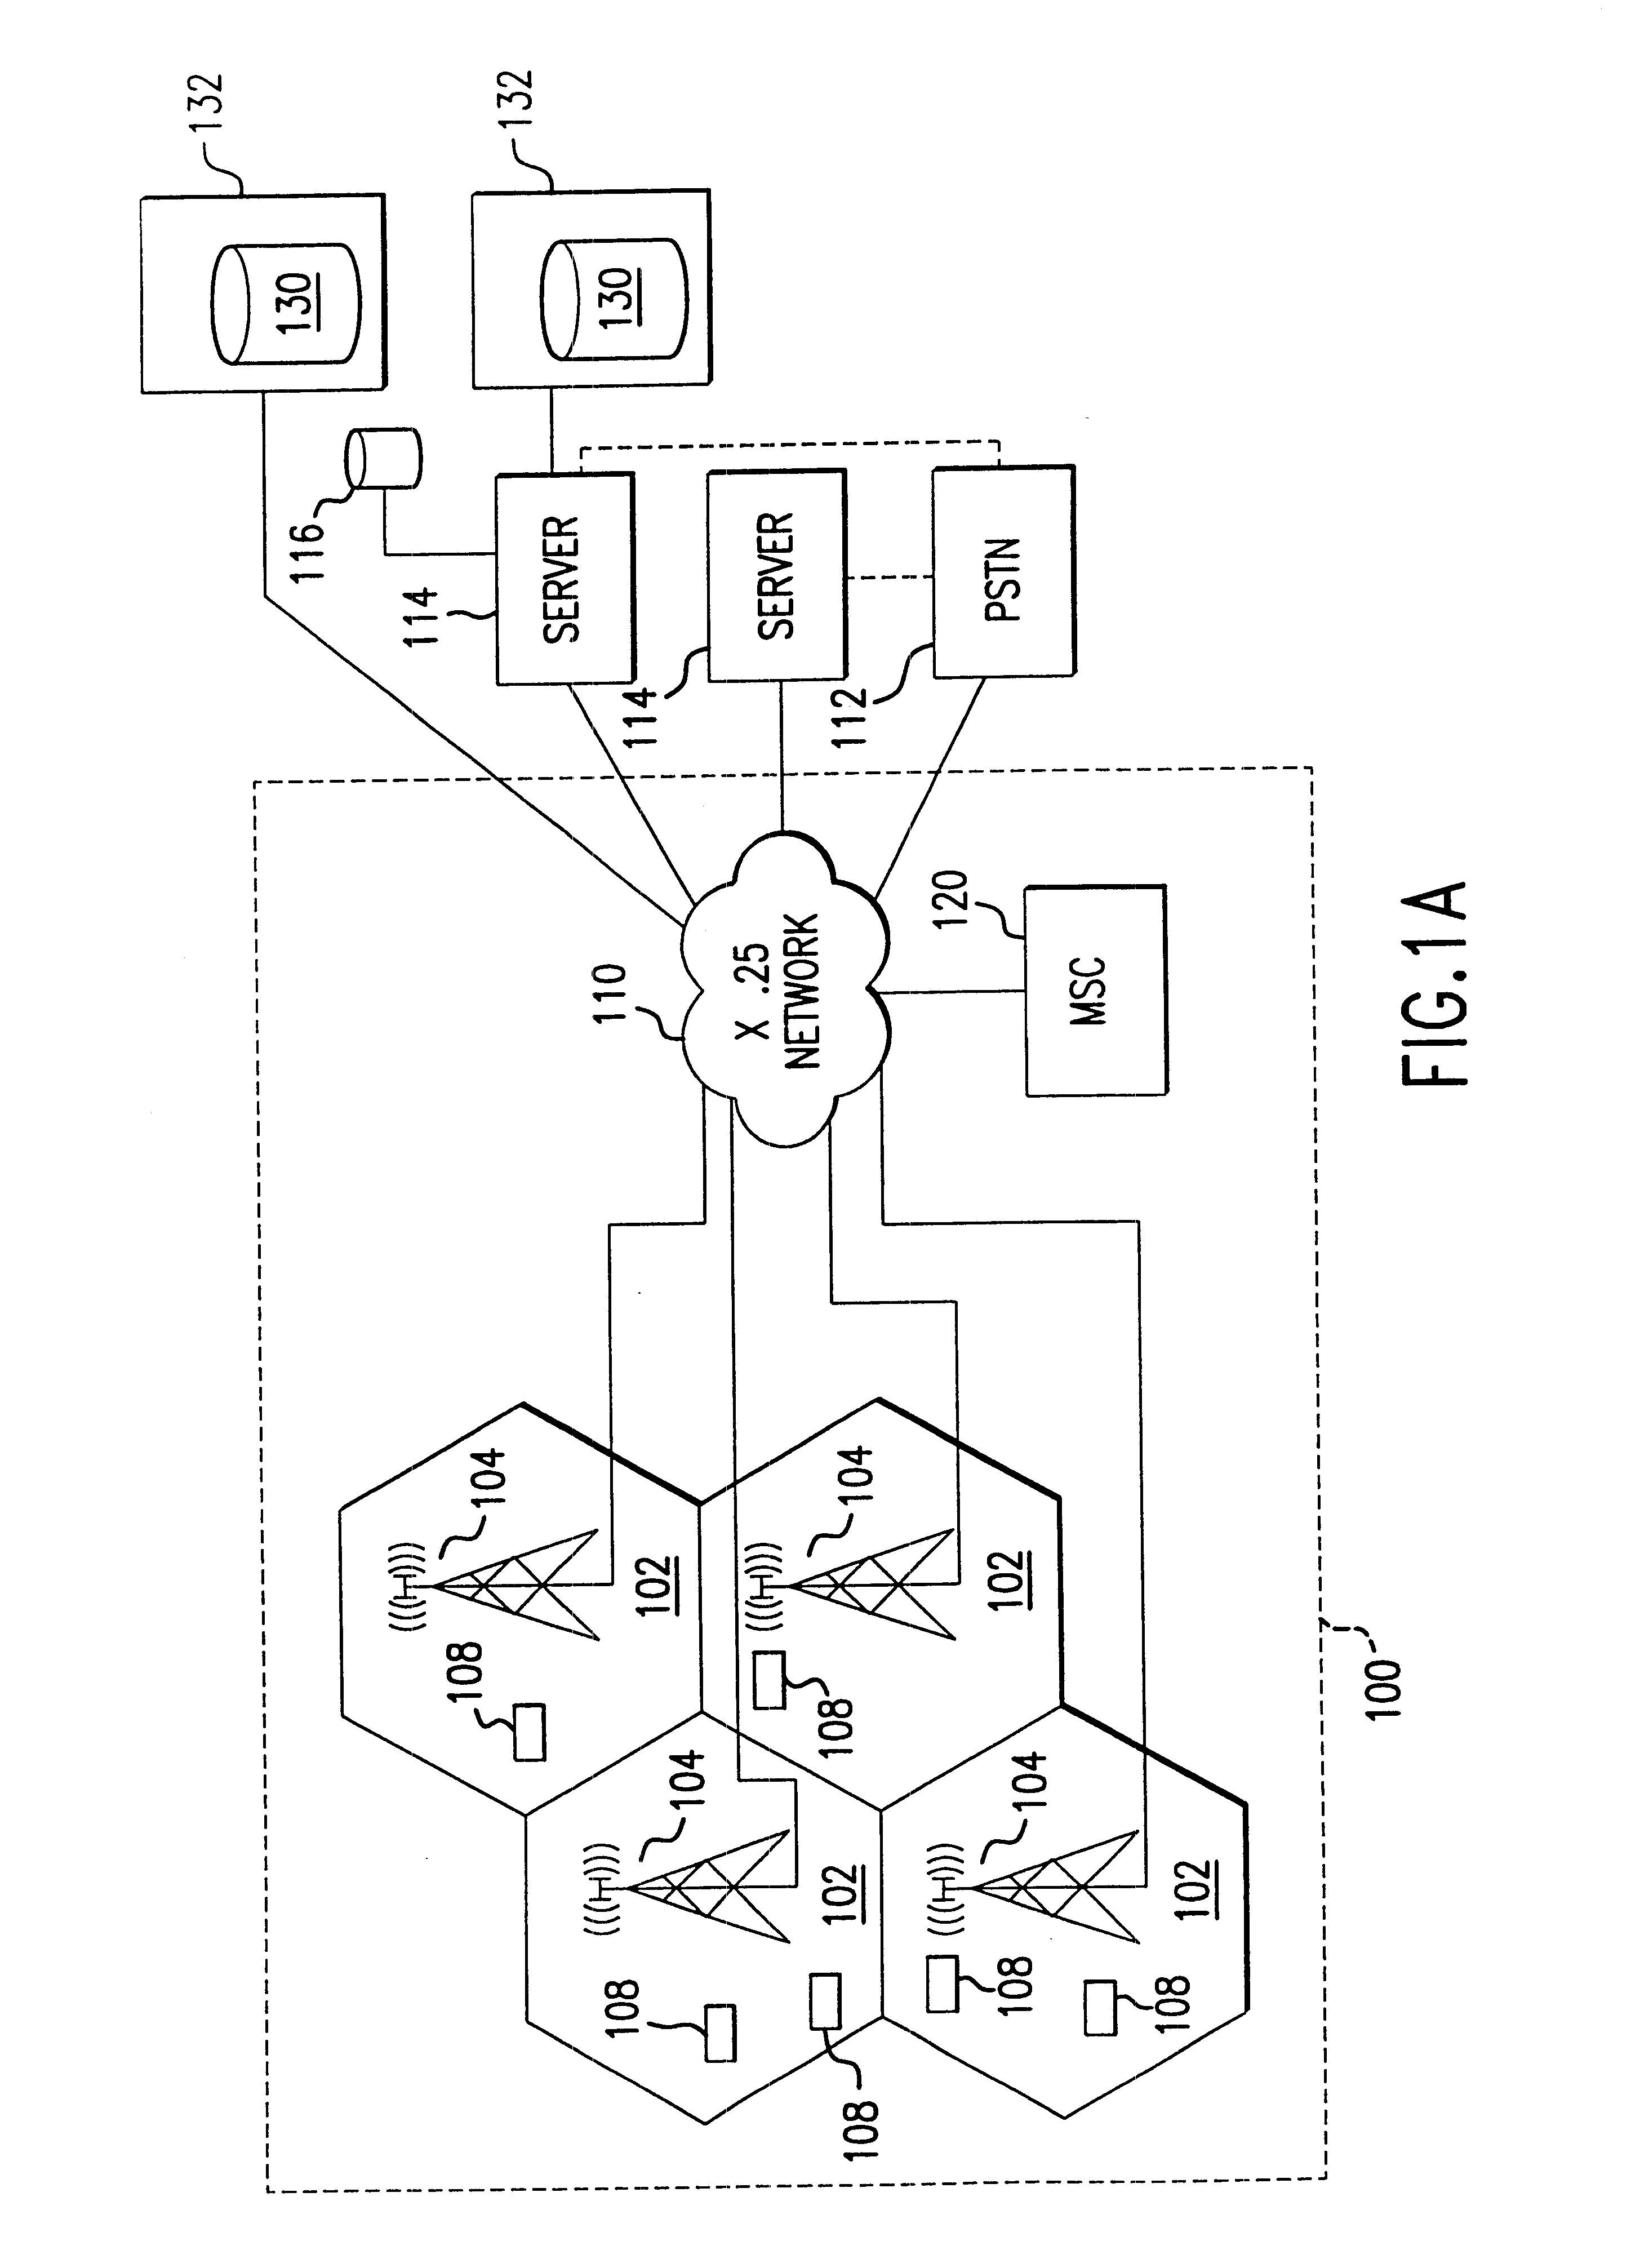 System, method and apparatus for utilizing transaction databases in a client-server environment